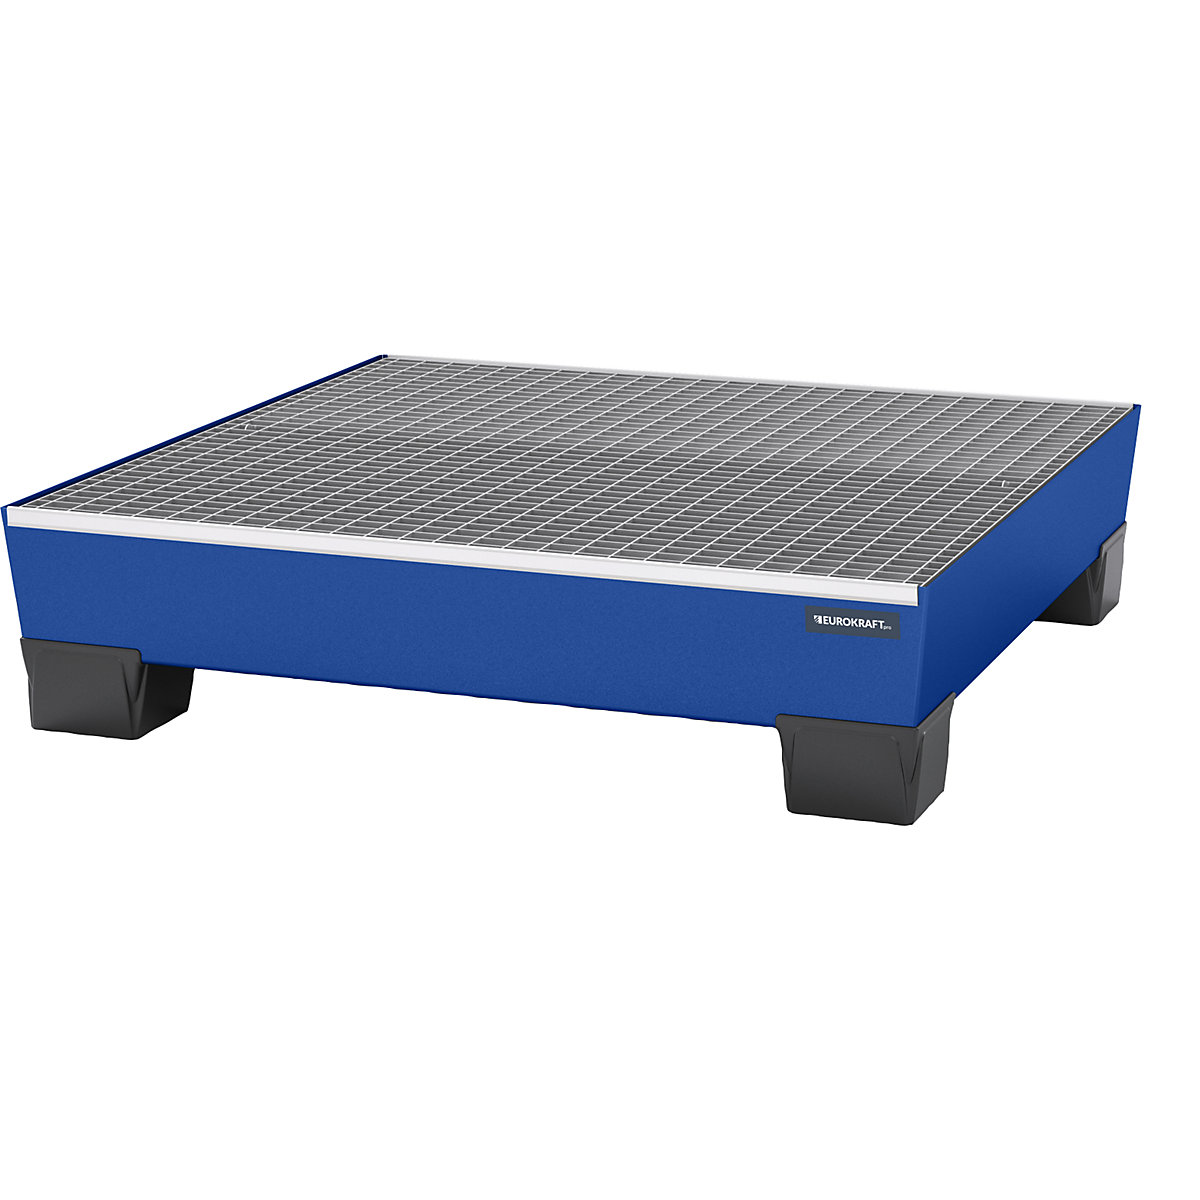 Steel sump tray with plastic feet – eurokraft pro, LxWxH 1240 x 1210 x 295 mm, blue, with grate-6